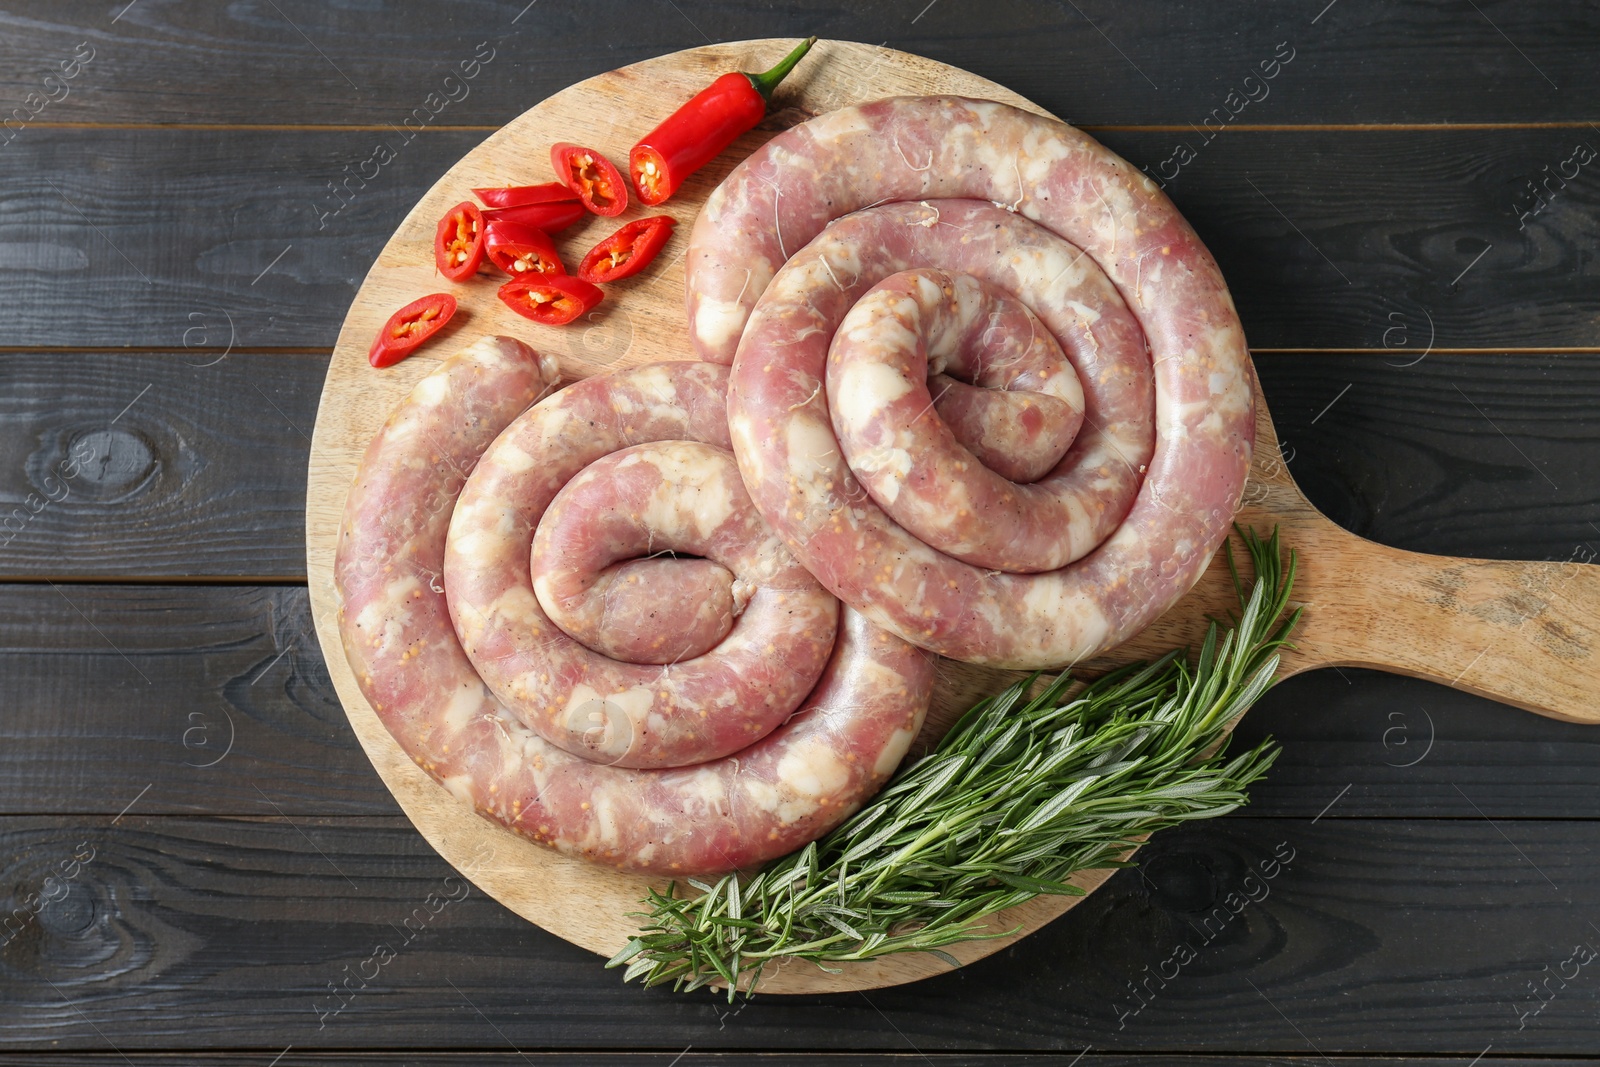 Photo of Raw homemade sausage, chili pepper and rosemary on dark wooden table, top view